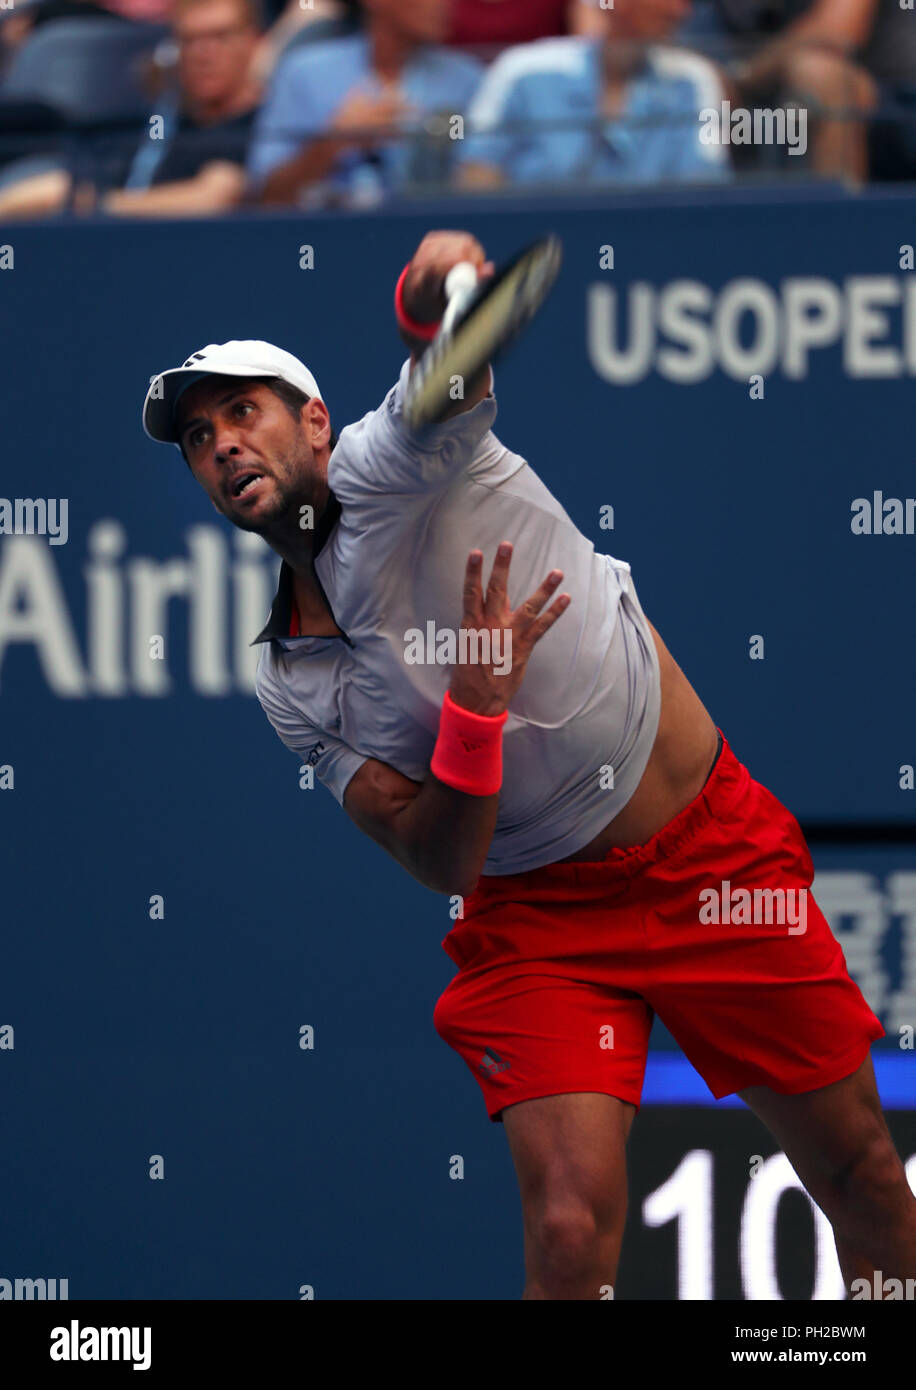 New York, United States. 29th Aug, 2018. Flushing Meadows, New York - August 29, 2018: US Open Tennis: Fernando Verdasco of Spain on his way to defeating Andy Murray of Great Britain during their second round match to at the US Open in Flushing Meadows, New York. Verdasco won the match in four sets. Credit: Adam Stoltman/Alamy Live News Stock Photo